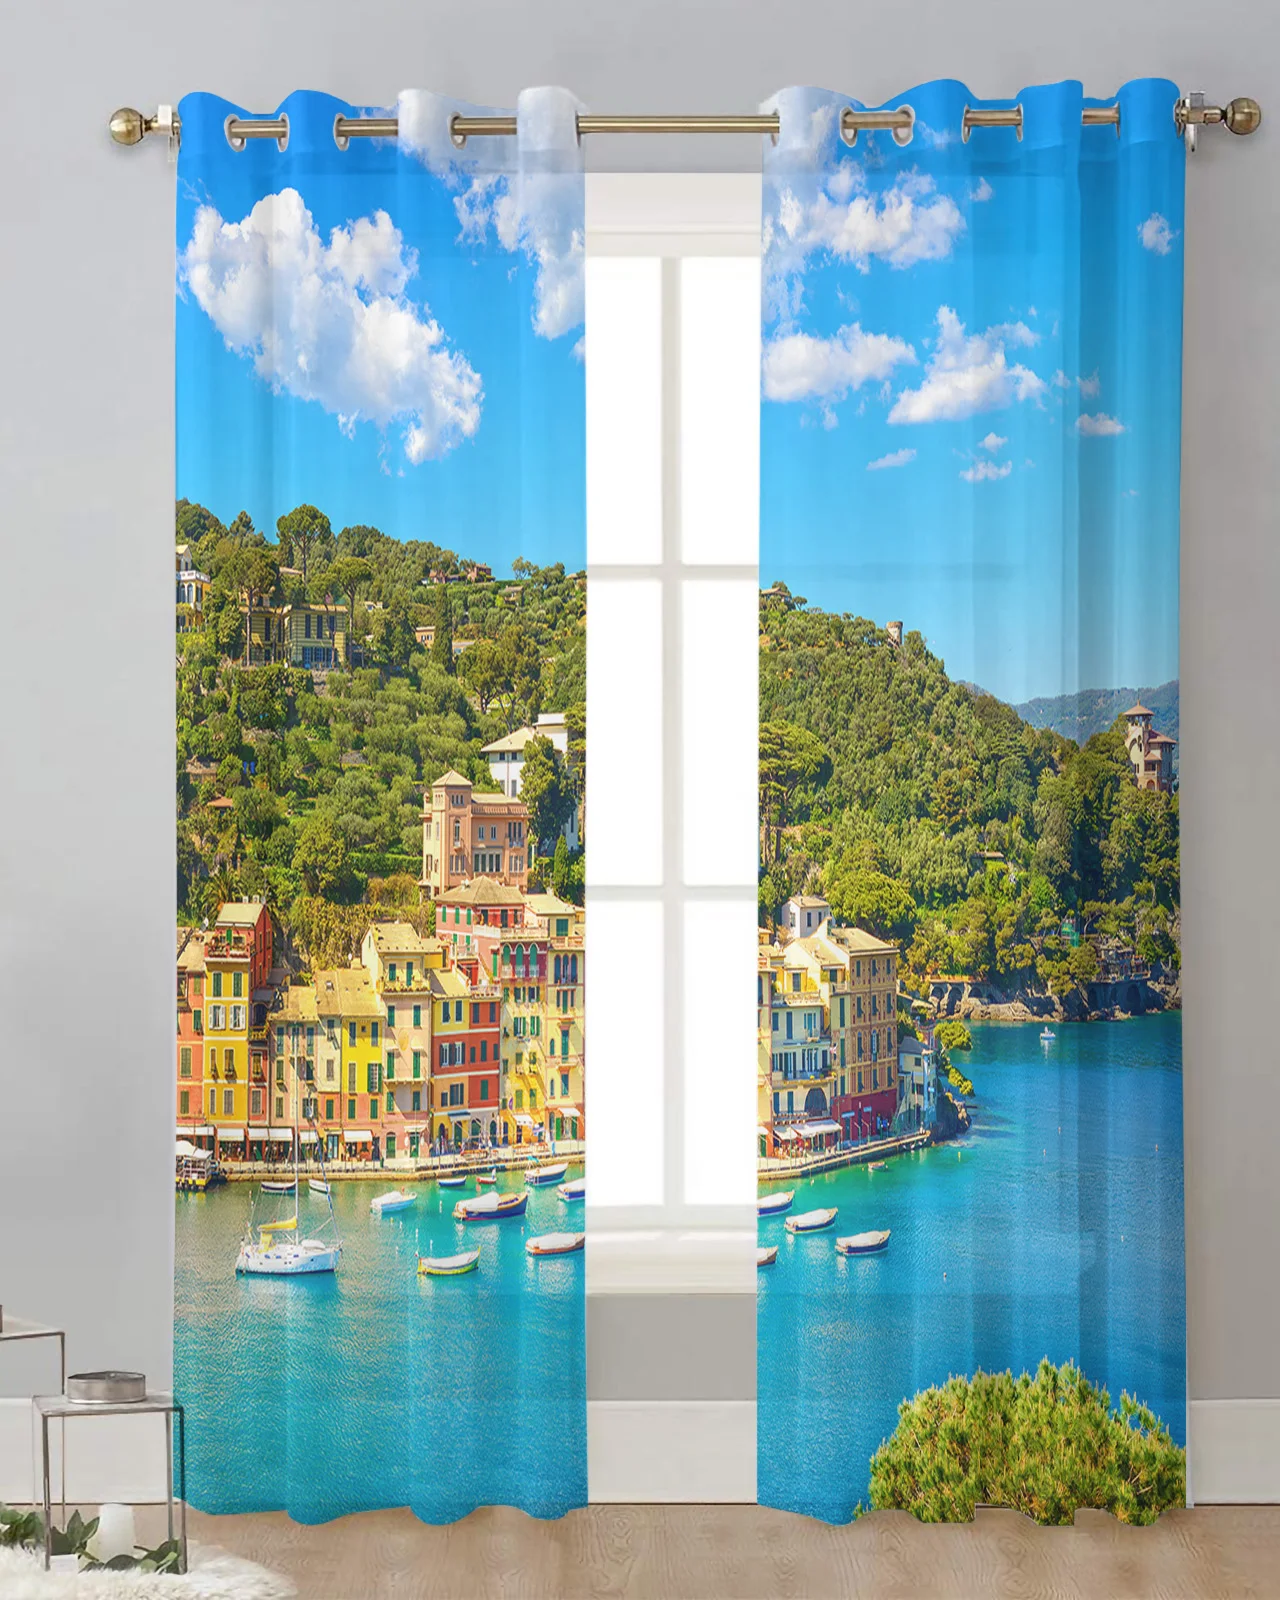 Seaside Building Vessel Sheer Curtains for Living Room Bedroom Kitchen Voile Tulle Curtains Window Treatments